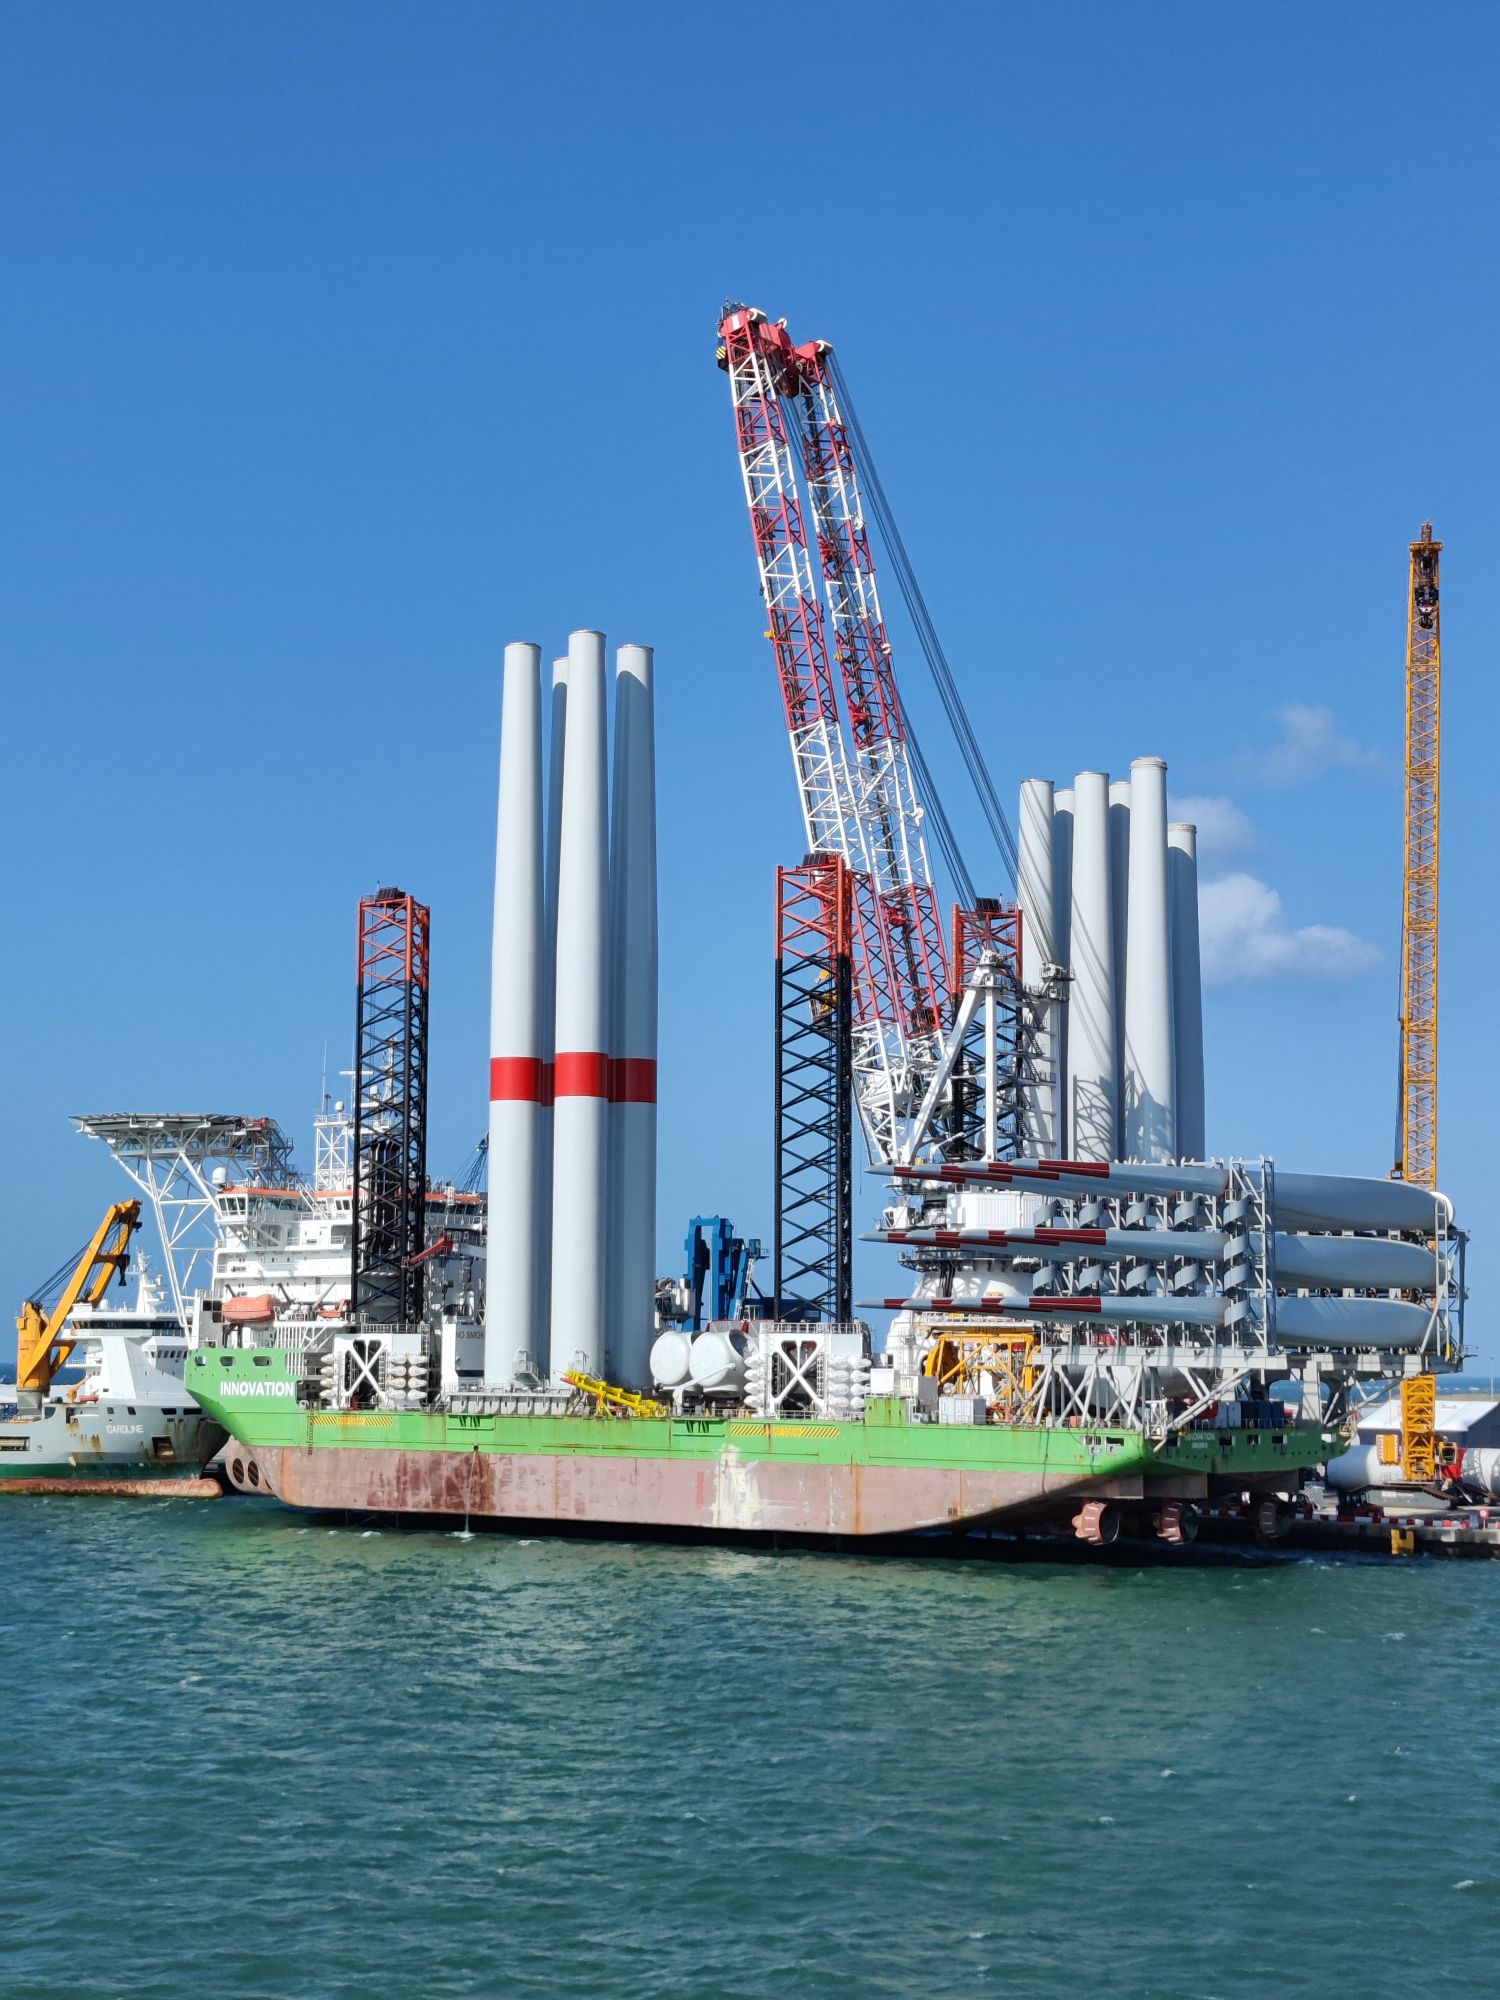 Some large wind turbines being loaded onto a barge that has 3 pylons used as stilts.